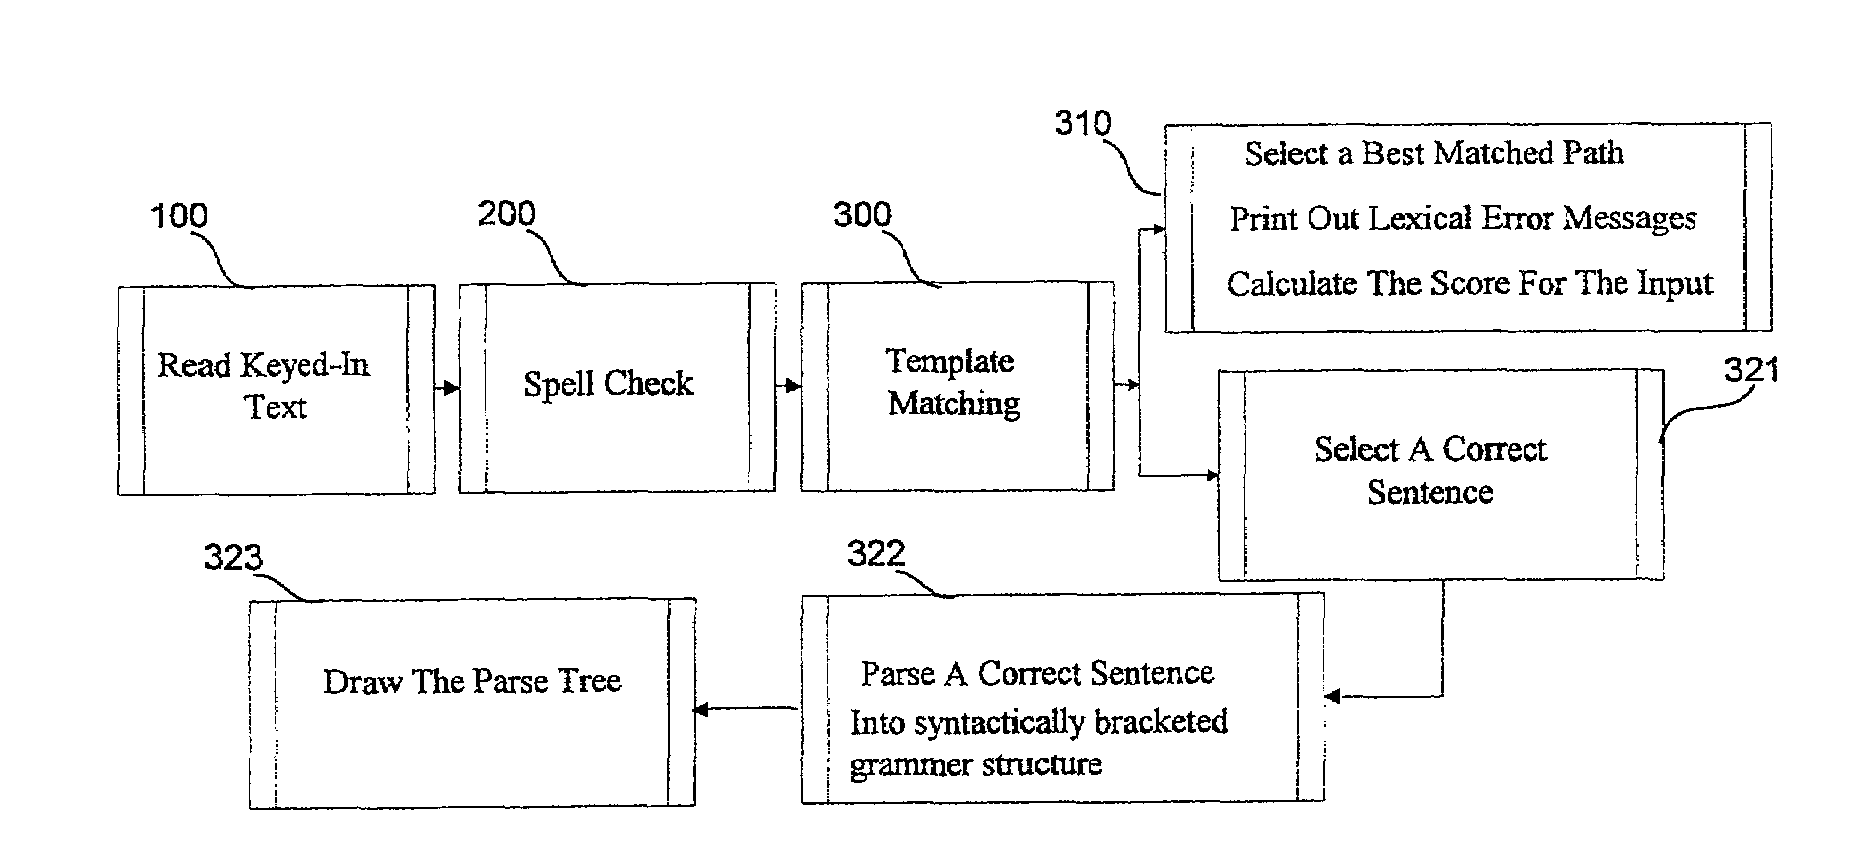 System and method for accurate grammar analysis using a learners' model and part-of-speech tagged (POST) parser